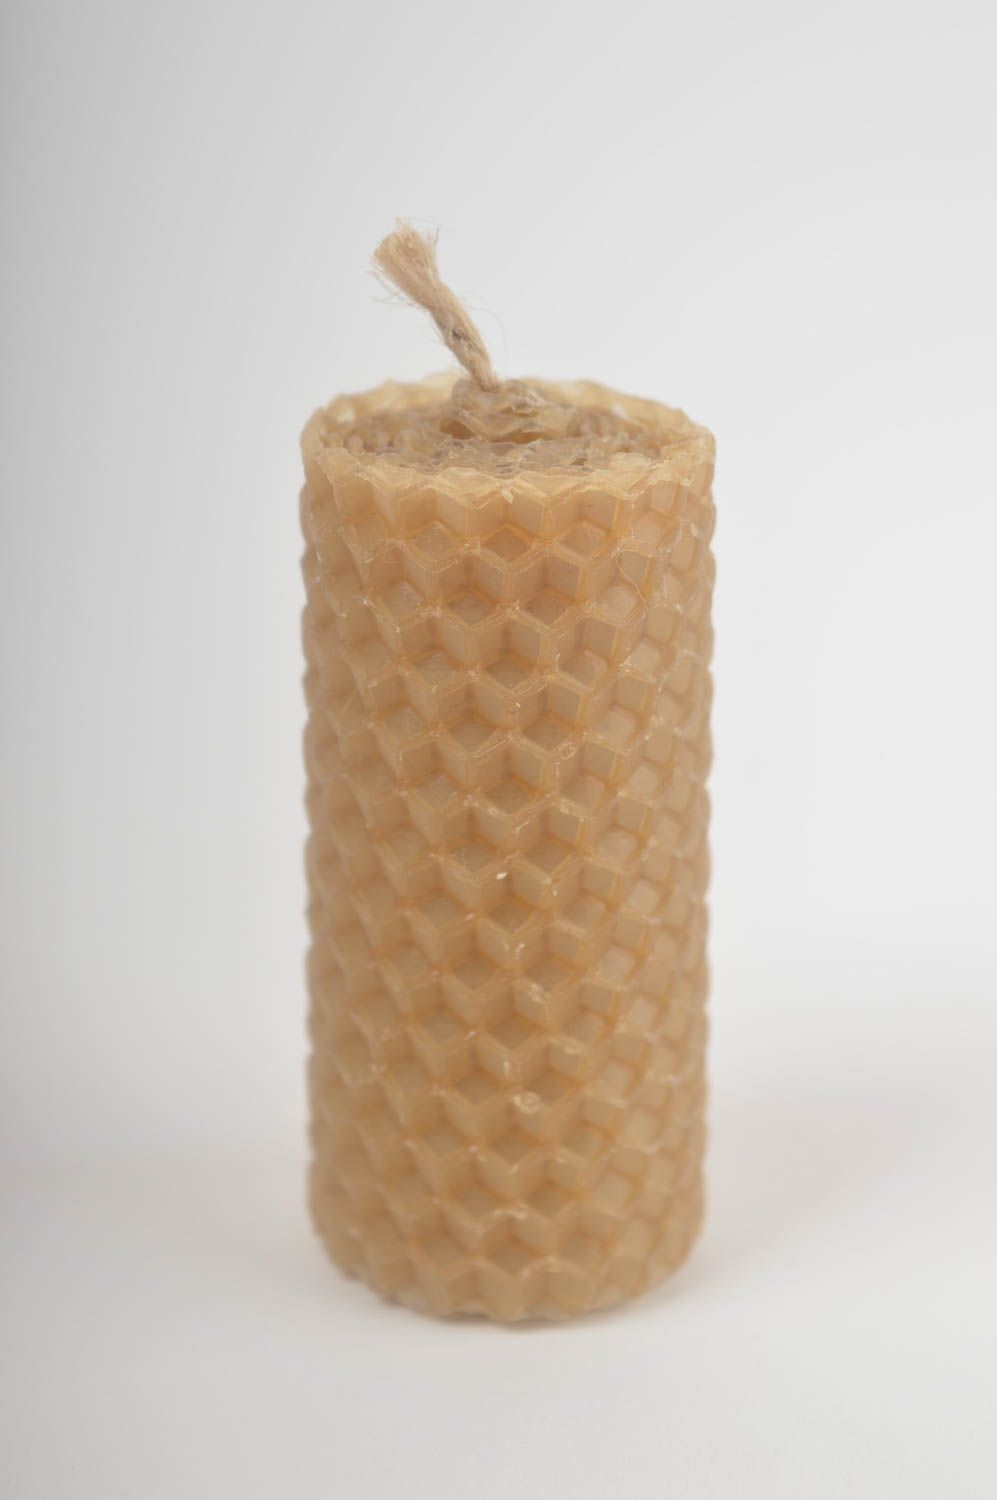 Natural bee wax 2 hour pillar candle for emergency preparedness 2,36 inches, 0,05 lb photo 3